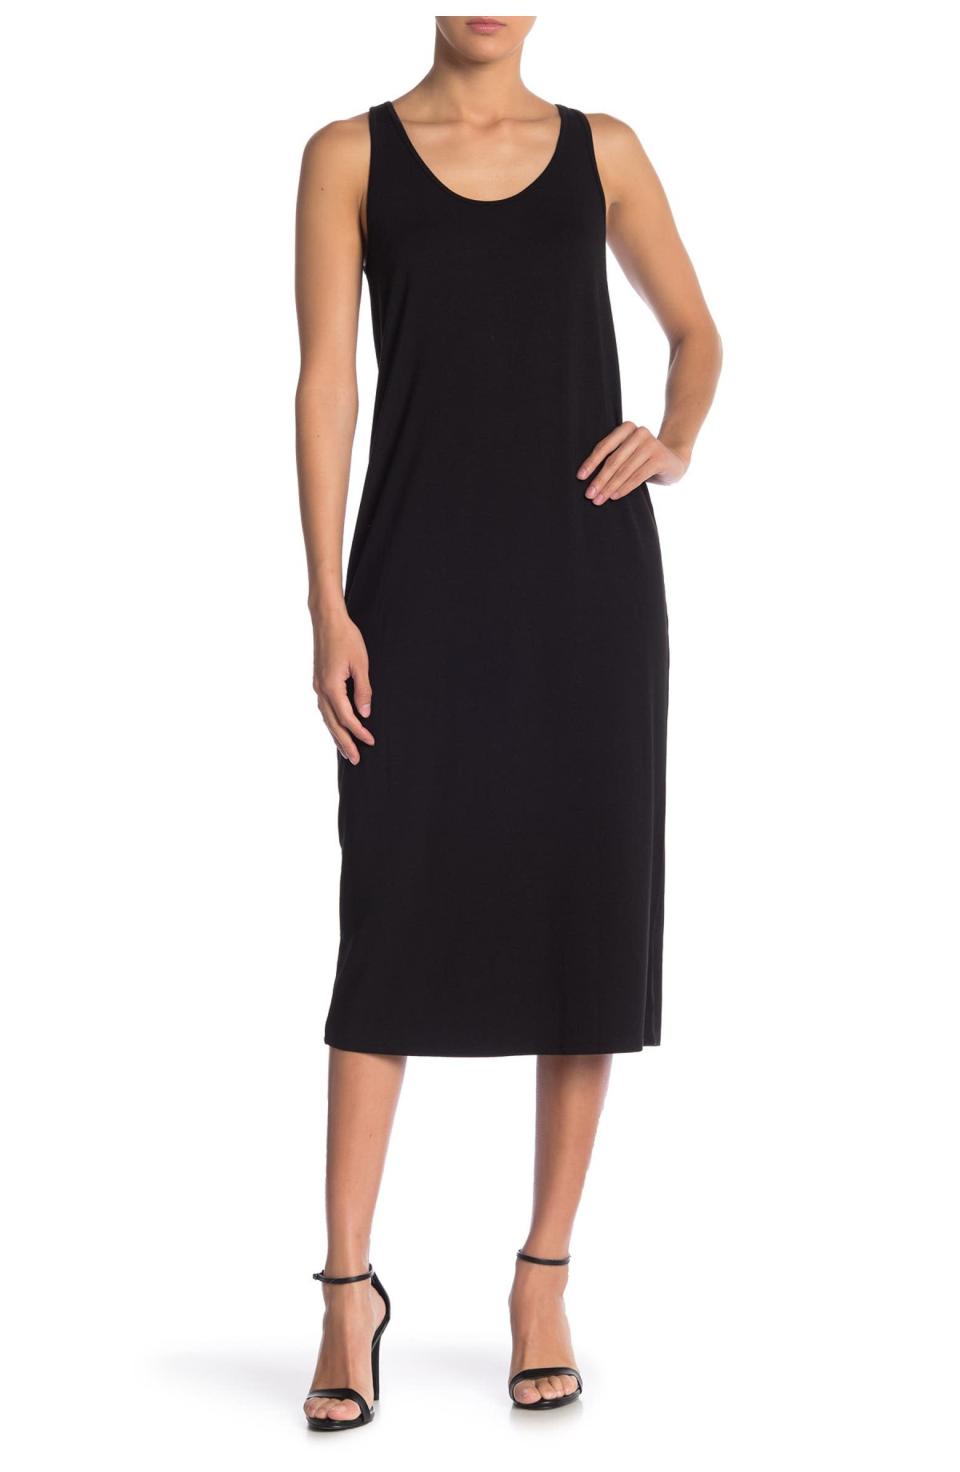 <h2>Philosophy Cashmere Midi Tank Dress</h2><br><strong>The Hype:</strong> 4.4 out of 5 stars; 352 reviews <br><br>You really can't go wrong with a simple black tank dress — especially one that's always under $20. This style has hundreds of glowing reviews from shoppers who are all about its versatility and non-clingy fit. "The sale price may give you pause, but you’d be missing out, I cannot believe how perfect this dress is for summer fun," writes a reviewer. "I usually only wear the color black, but I bought four out of six colors. The fabric has body so that it drapes and doesn’t cling. The scoop neck is in the right position for someone who doesn’t want too much cleavage showing. A perfect day to evening dress."<br><br><strong>Philosophy Cashmere</strong> Scoop Neck Midi Tank Dress, $, available at <a href="https://go.skimresources.com/?id=30283X879131&url=https%3A%2F%2Fwww.nordstromrack.com%2Fs%2Fphilosophy-cashmere-scoop-neck-midi-tank-dress%2F6044409" rel="nofollow noopener" target="_blank" data-ylk="slk:Nordstrom Rack" class="link ">Nordstrom Rack</a>